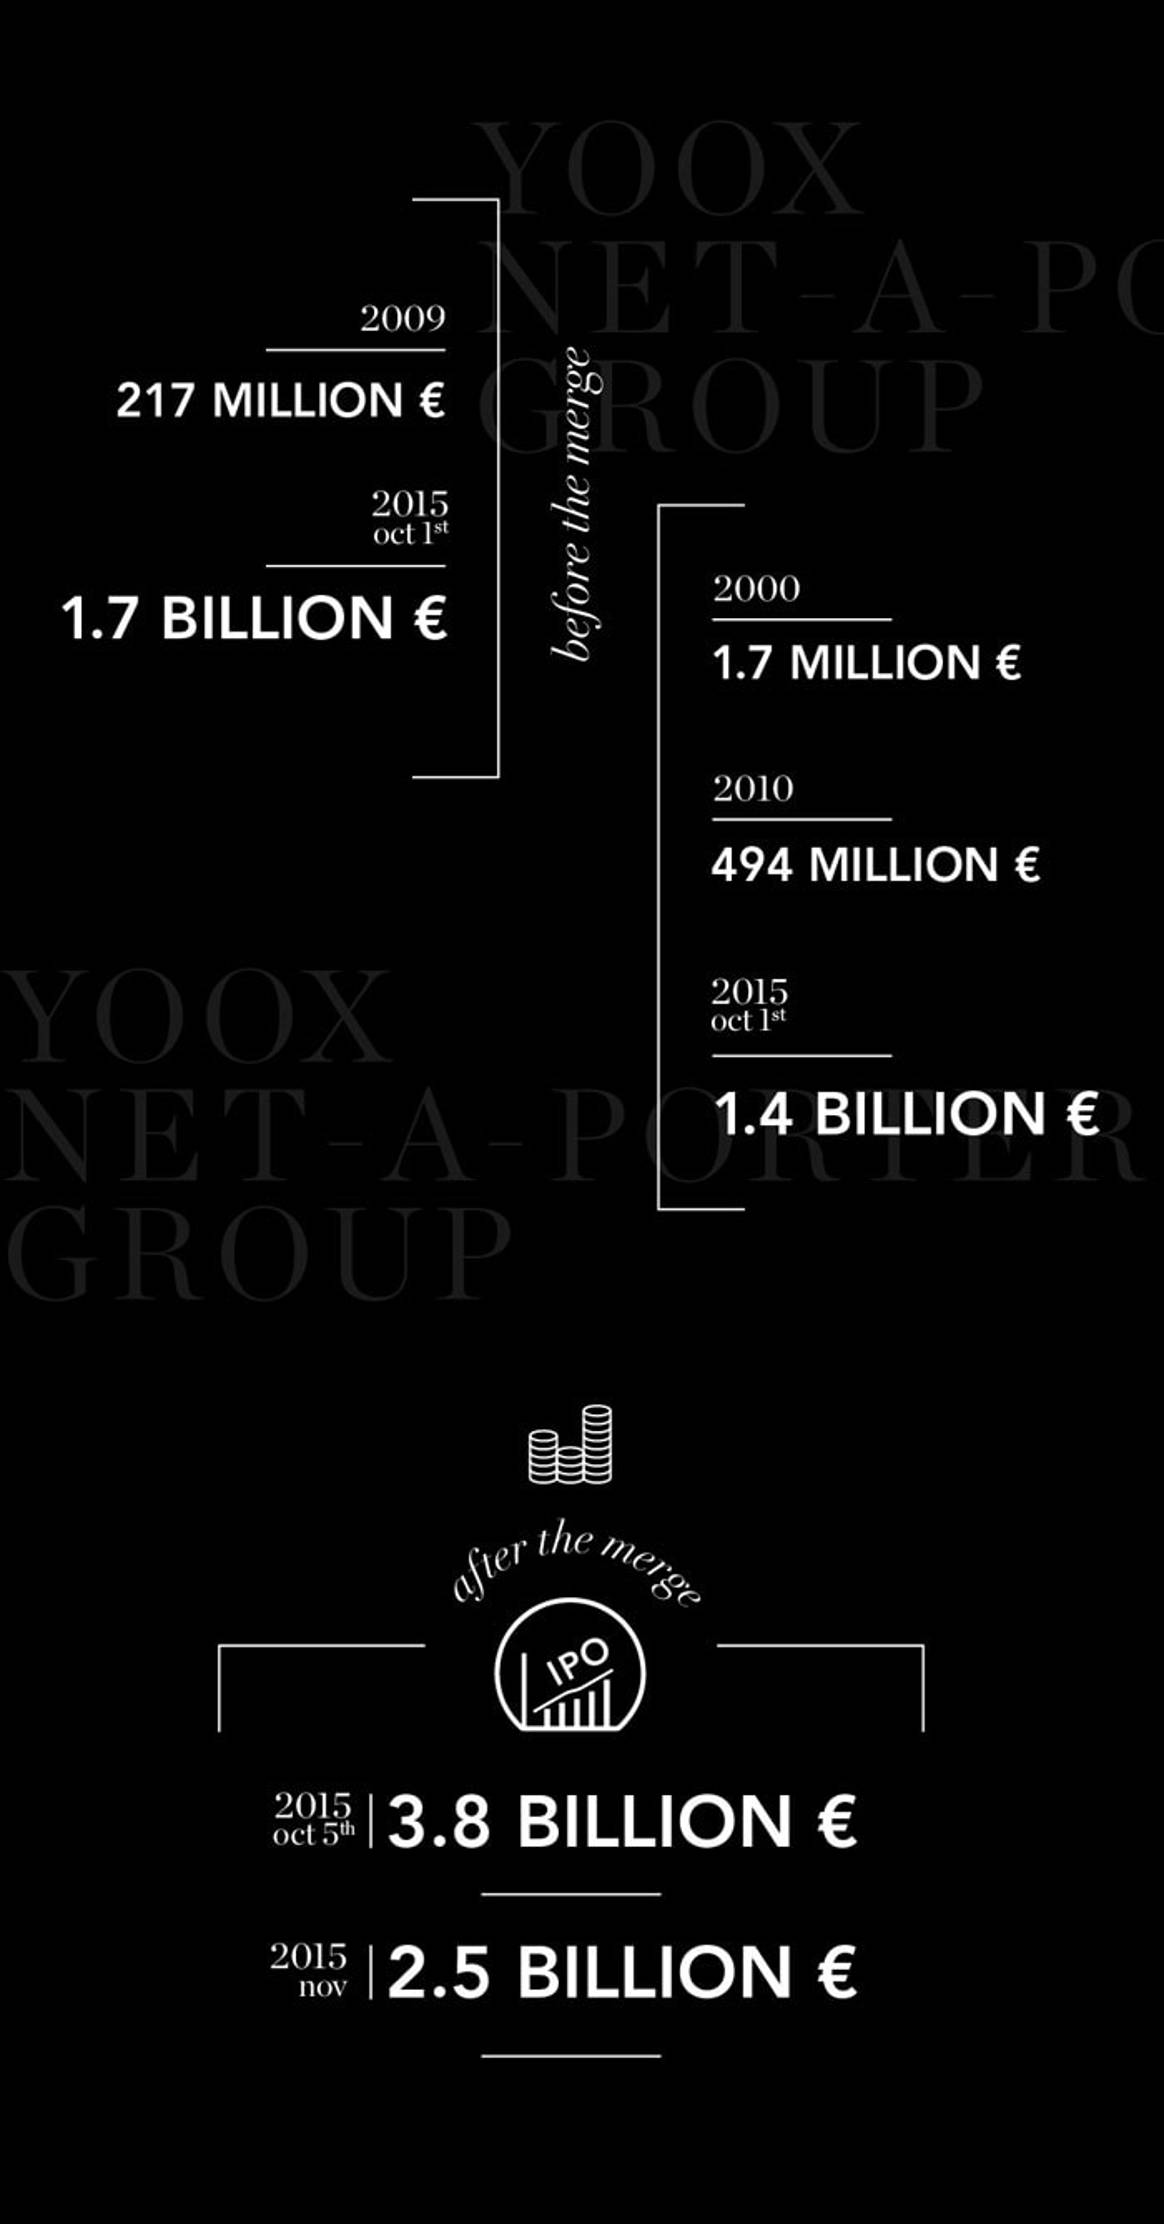 What comes next for Yoox Net-a-Porter Group?